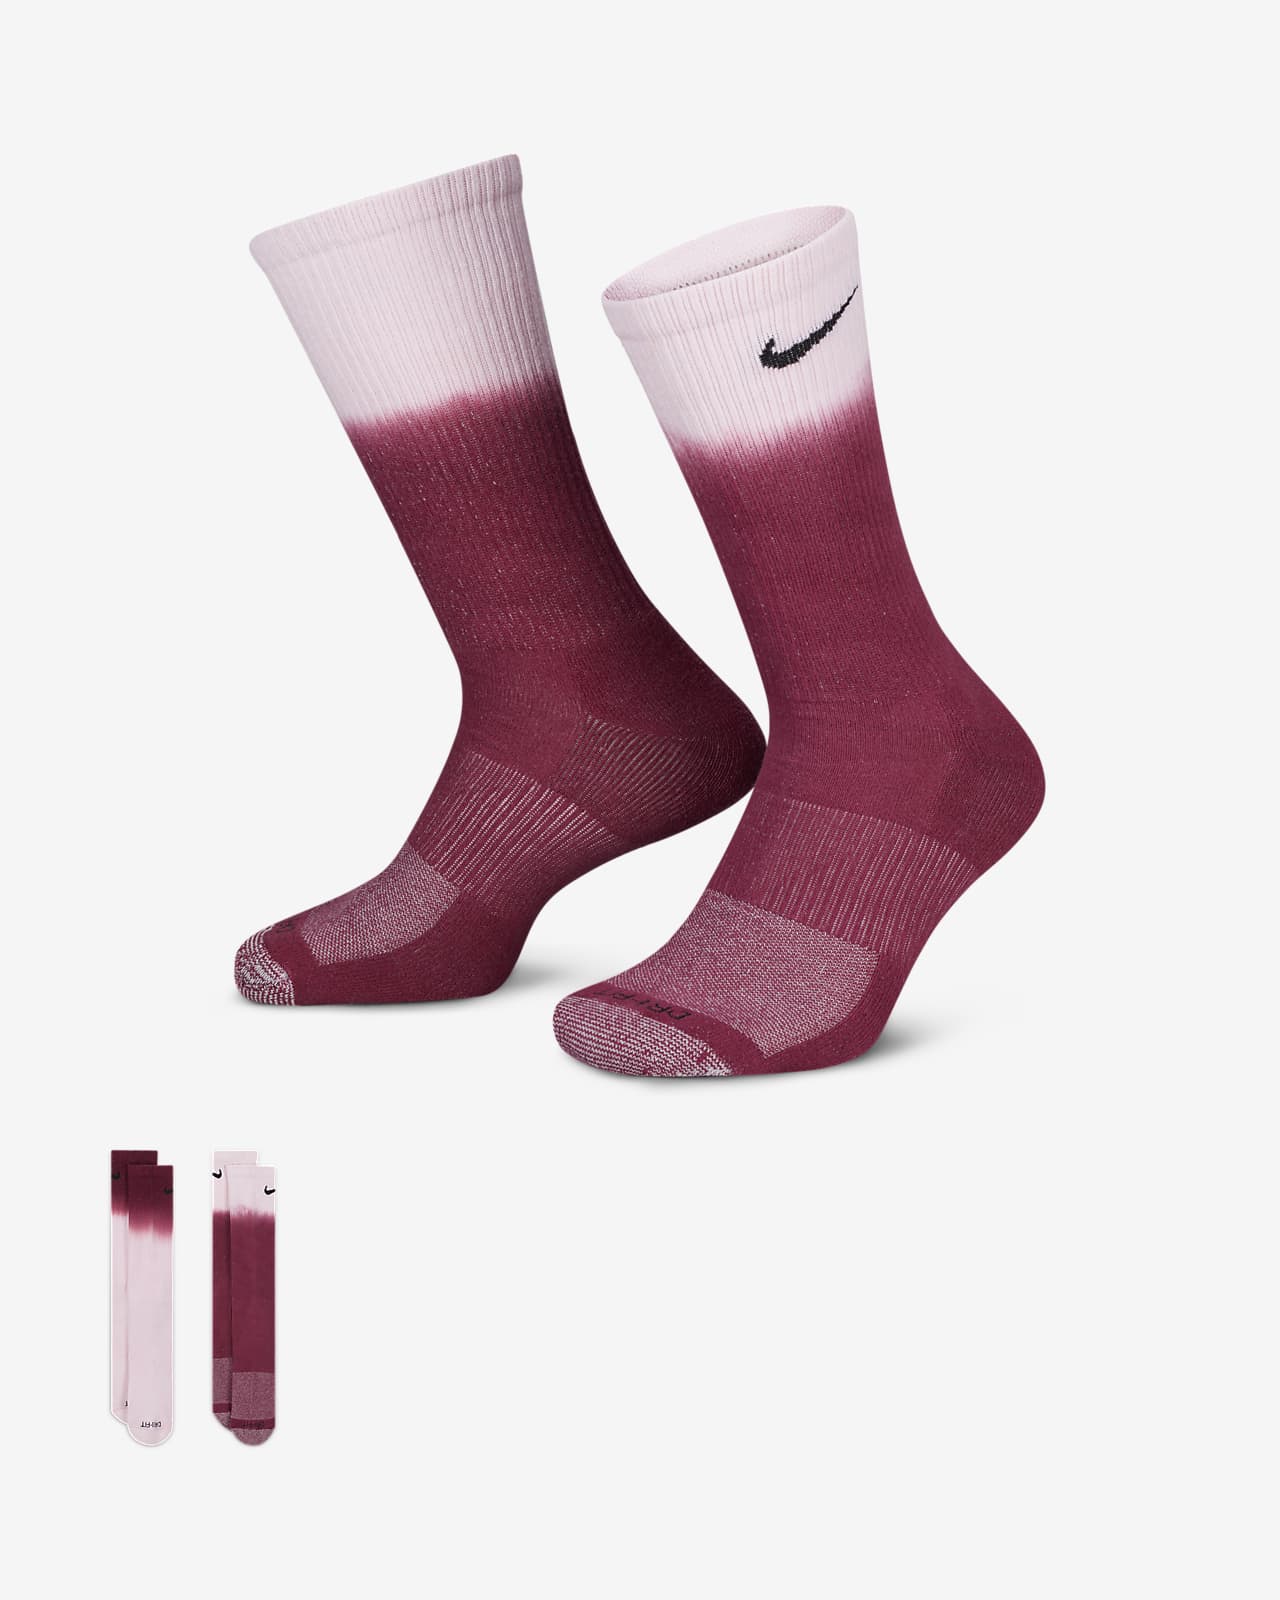 Nike Everyday Cushioned Calcetines largos pares). Nike ES